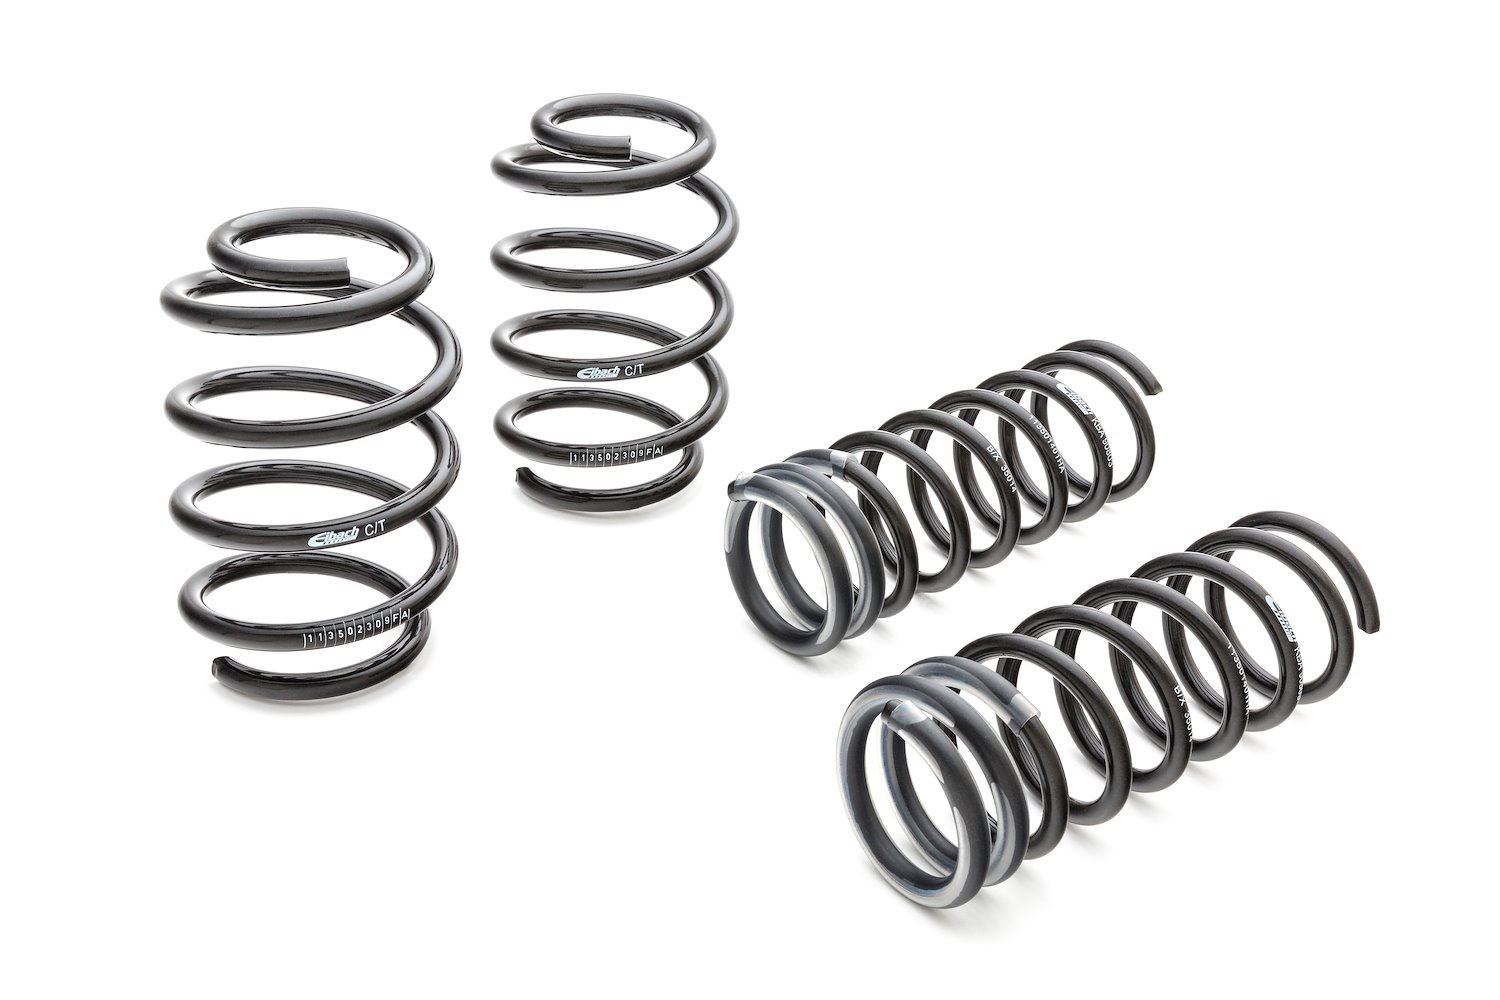 4017.140 Pro-Kit Lowering Springs 1992-1995 Civic - 1.400 in. Front/1.200 in. Rear Drop